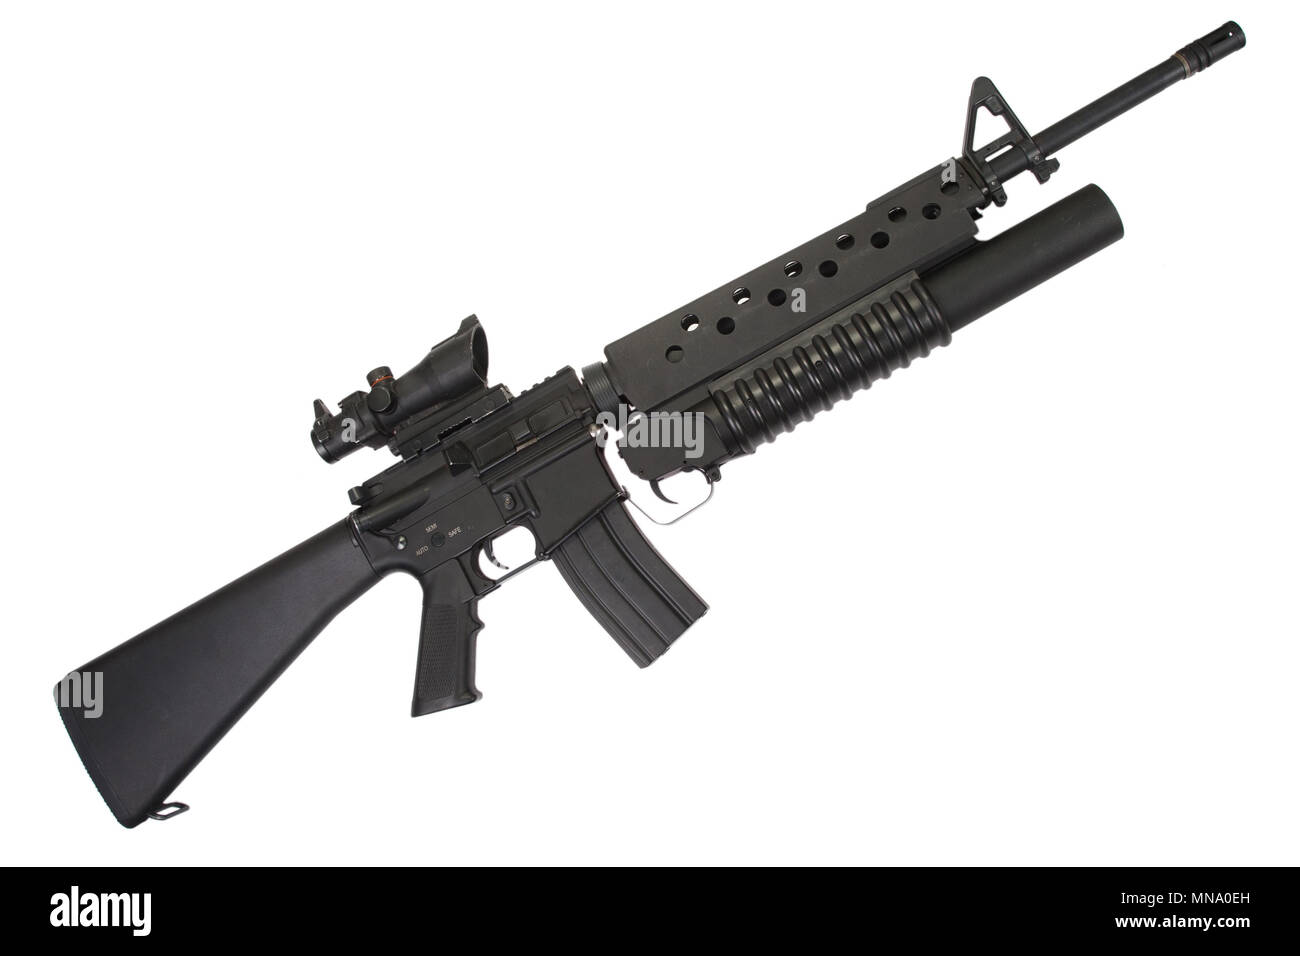 M16 rifle with an M203 grenade launcher Stock Photo